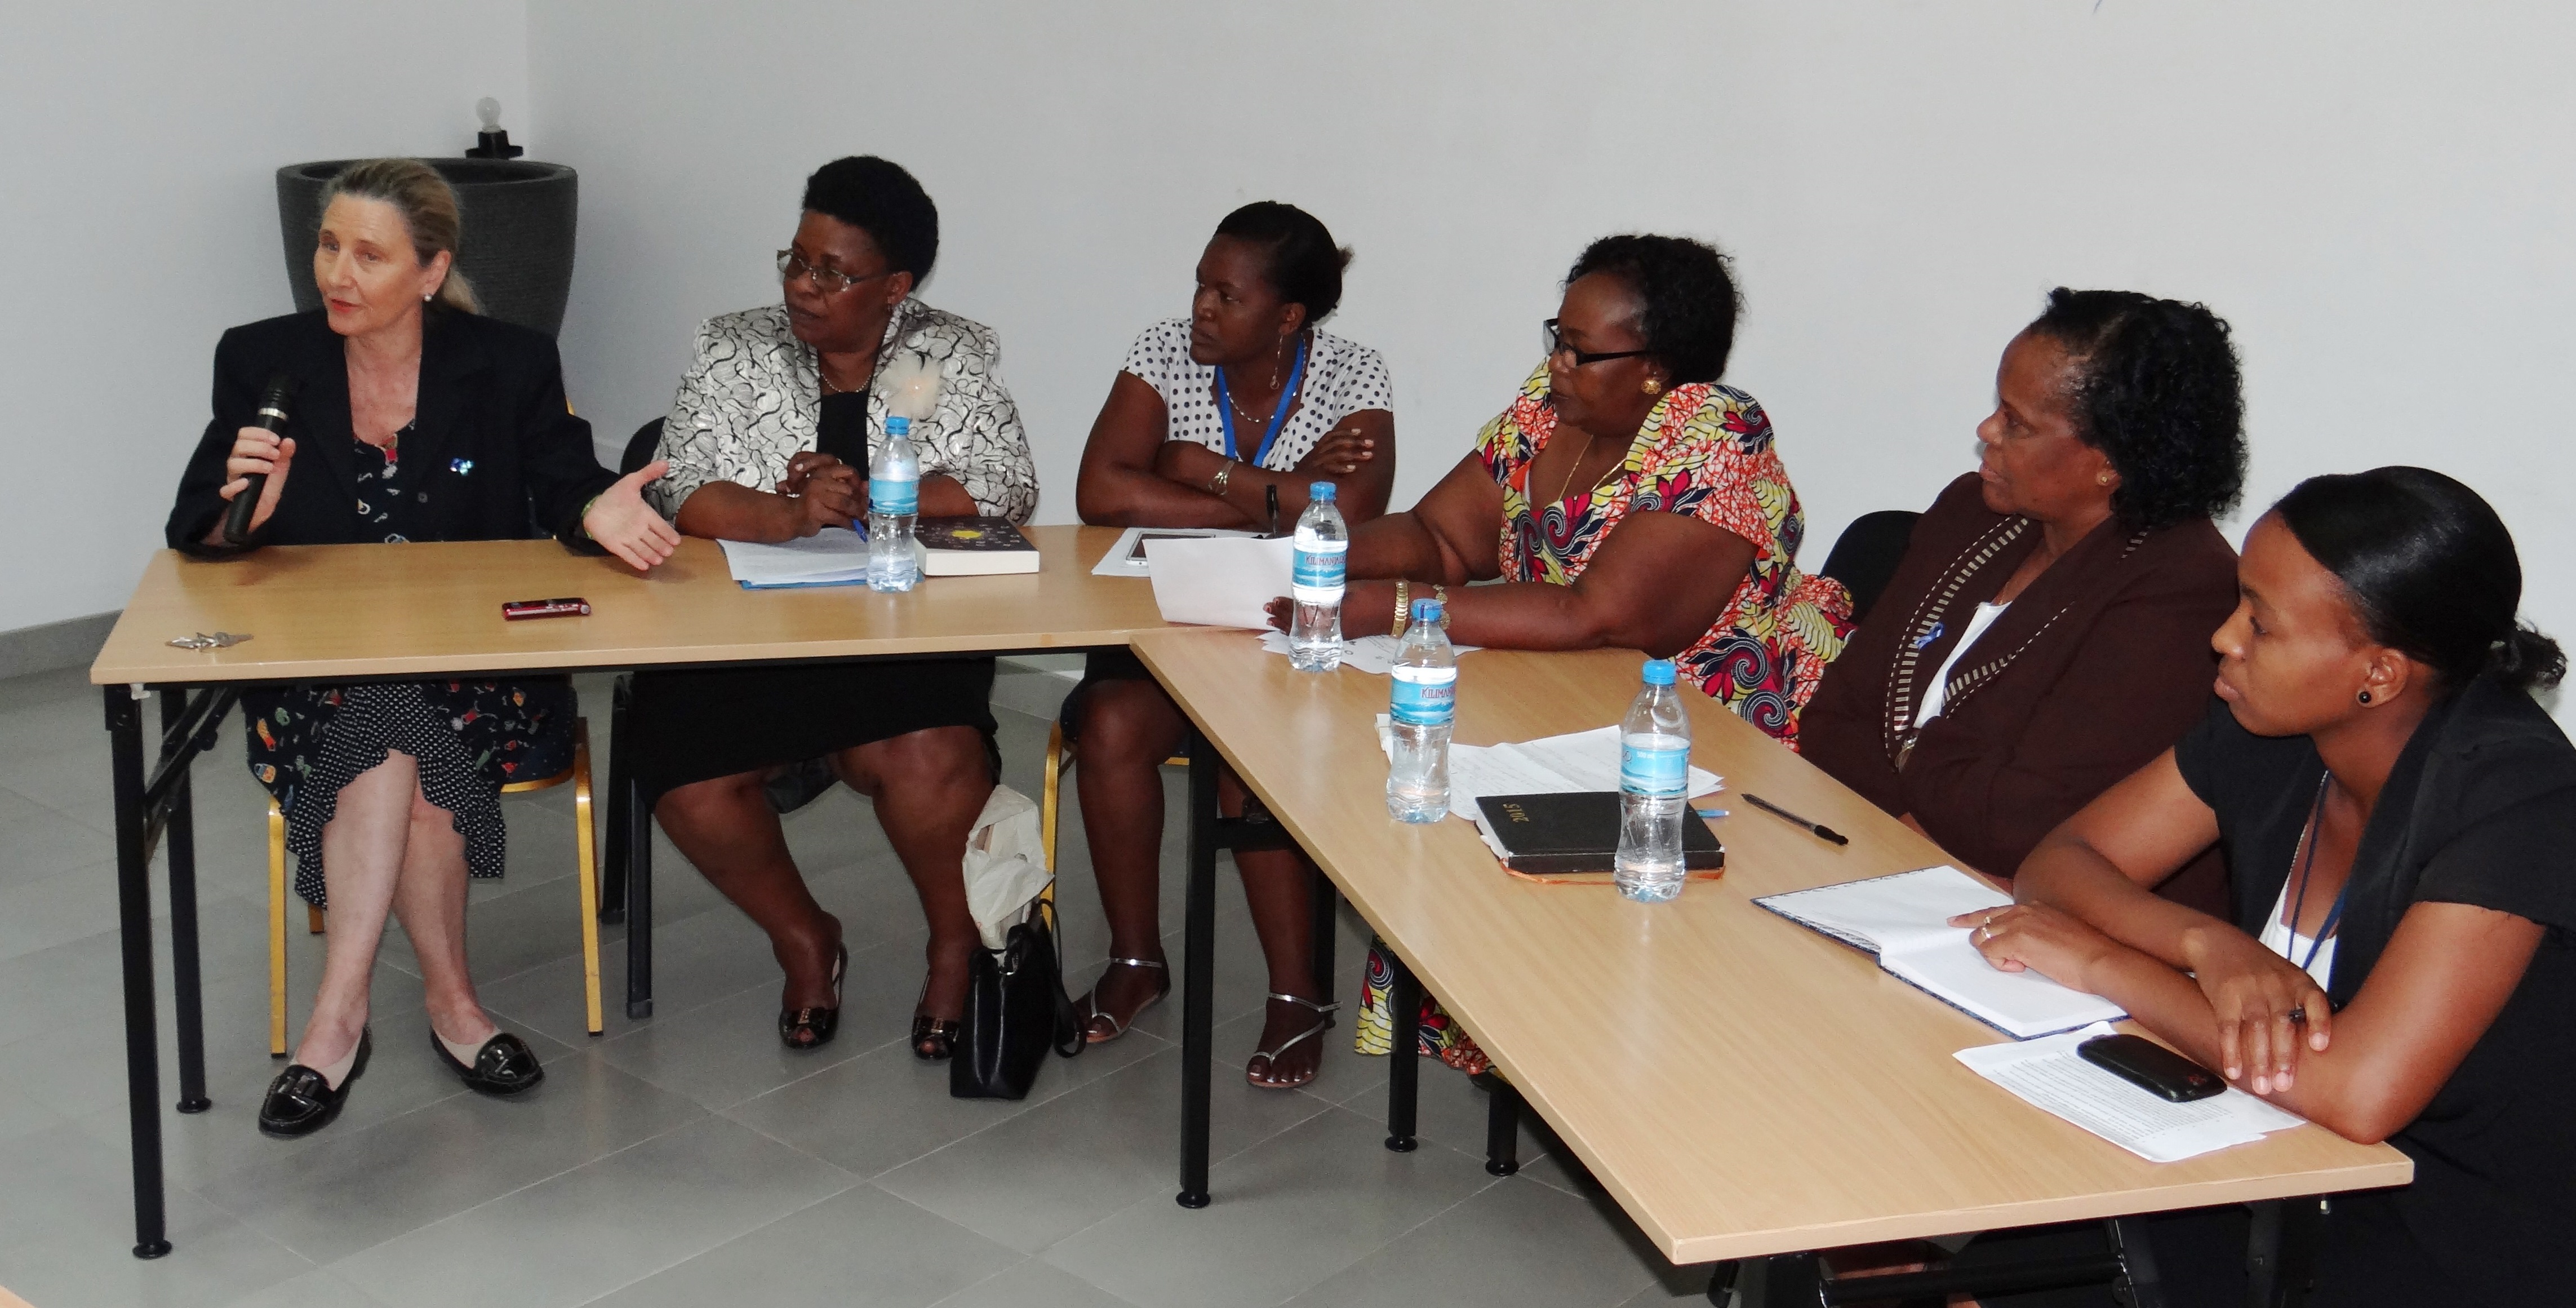 IITA women researchers in Tanzania sharing their life’s journeys and experiences to motivate other potential female scientists.